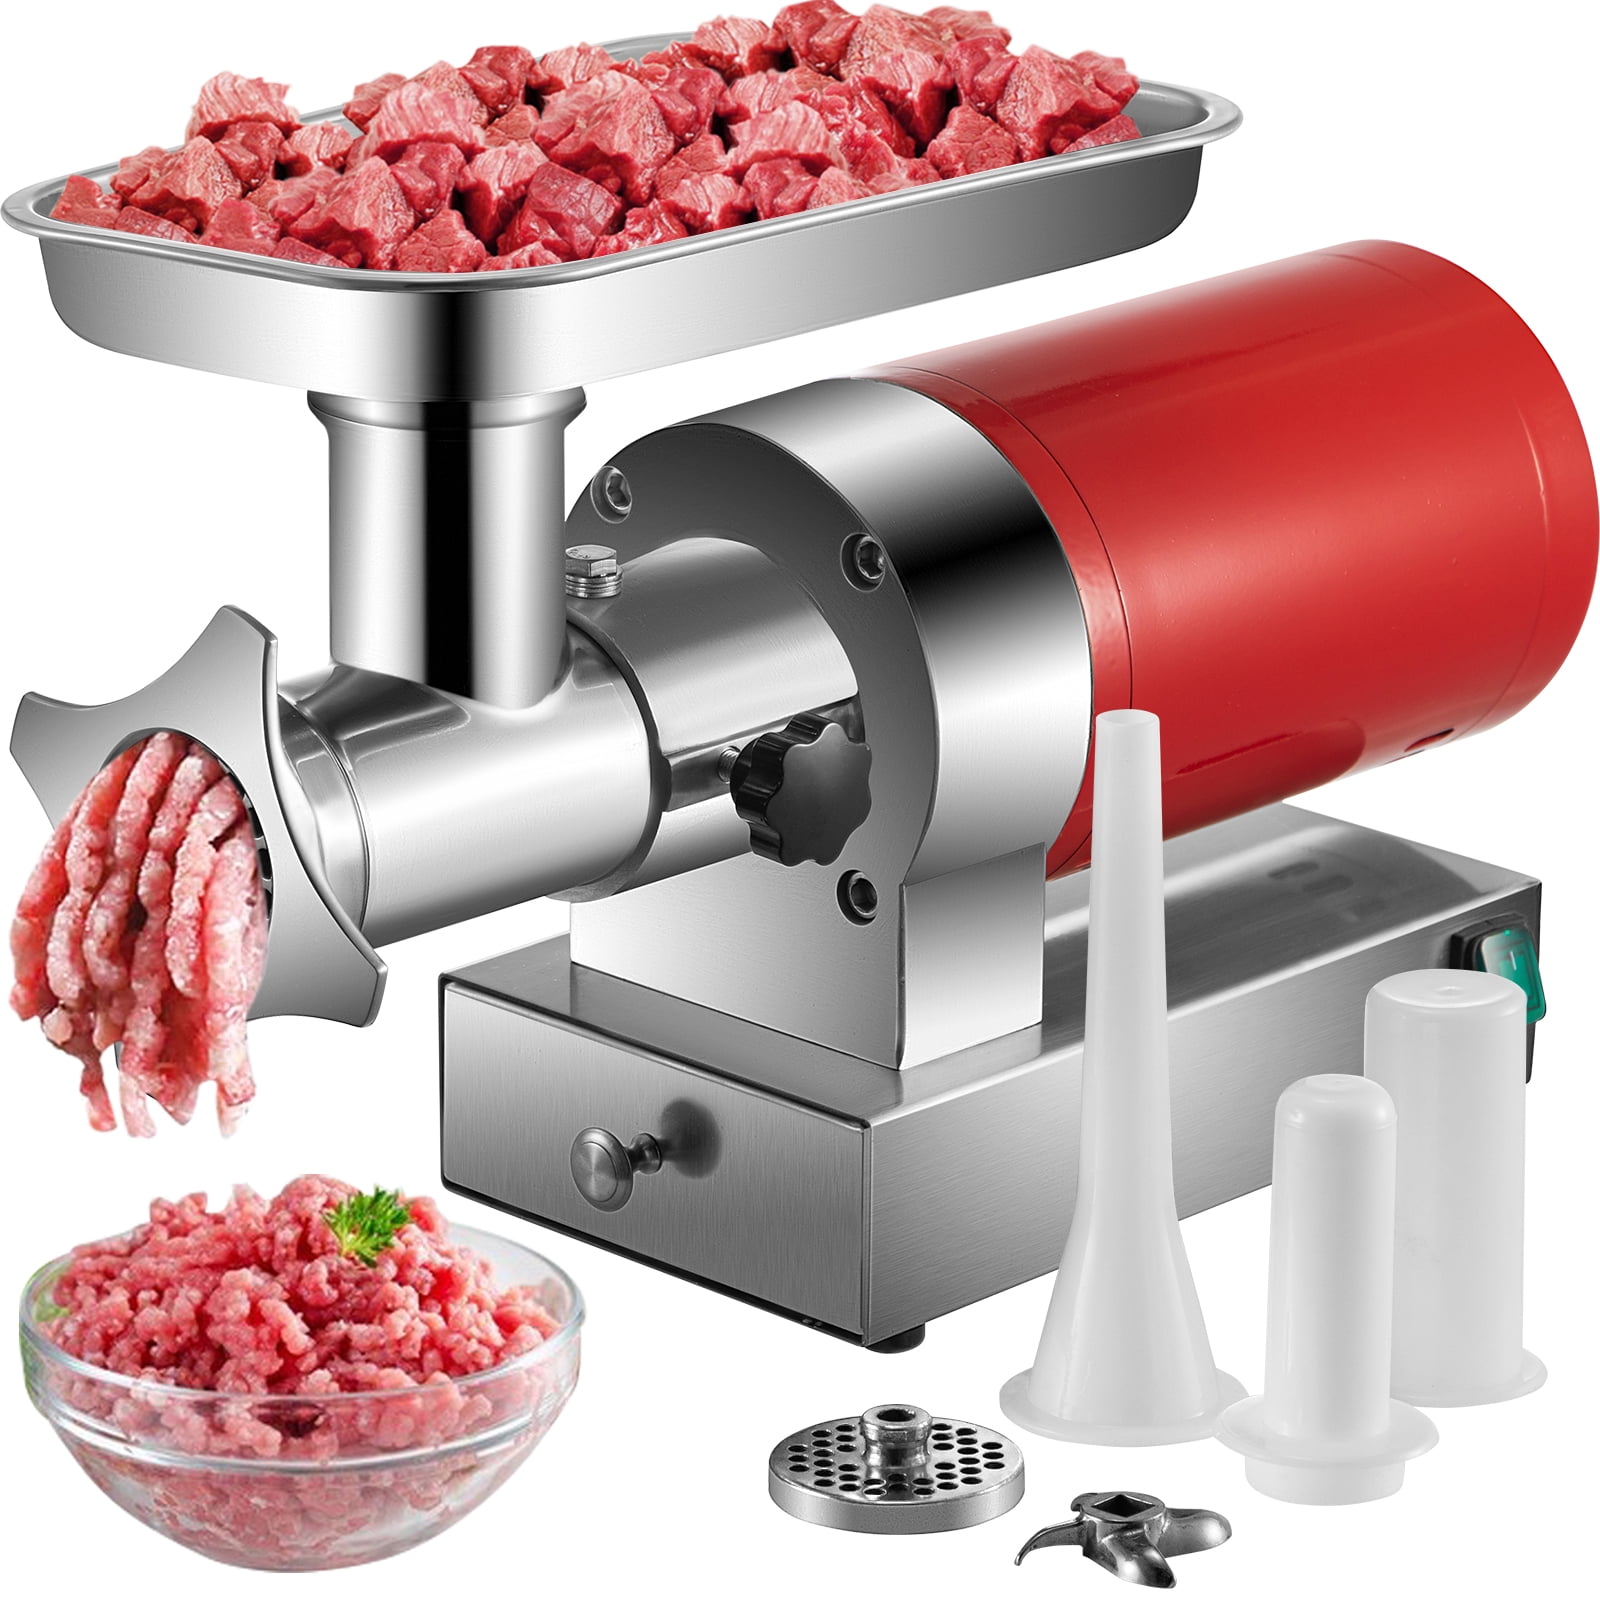 Fruit and Vegetables Zodiac No5 Heavy Duty Food Mincer for Mincing Meat 